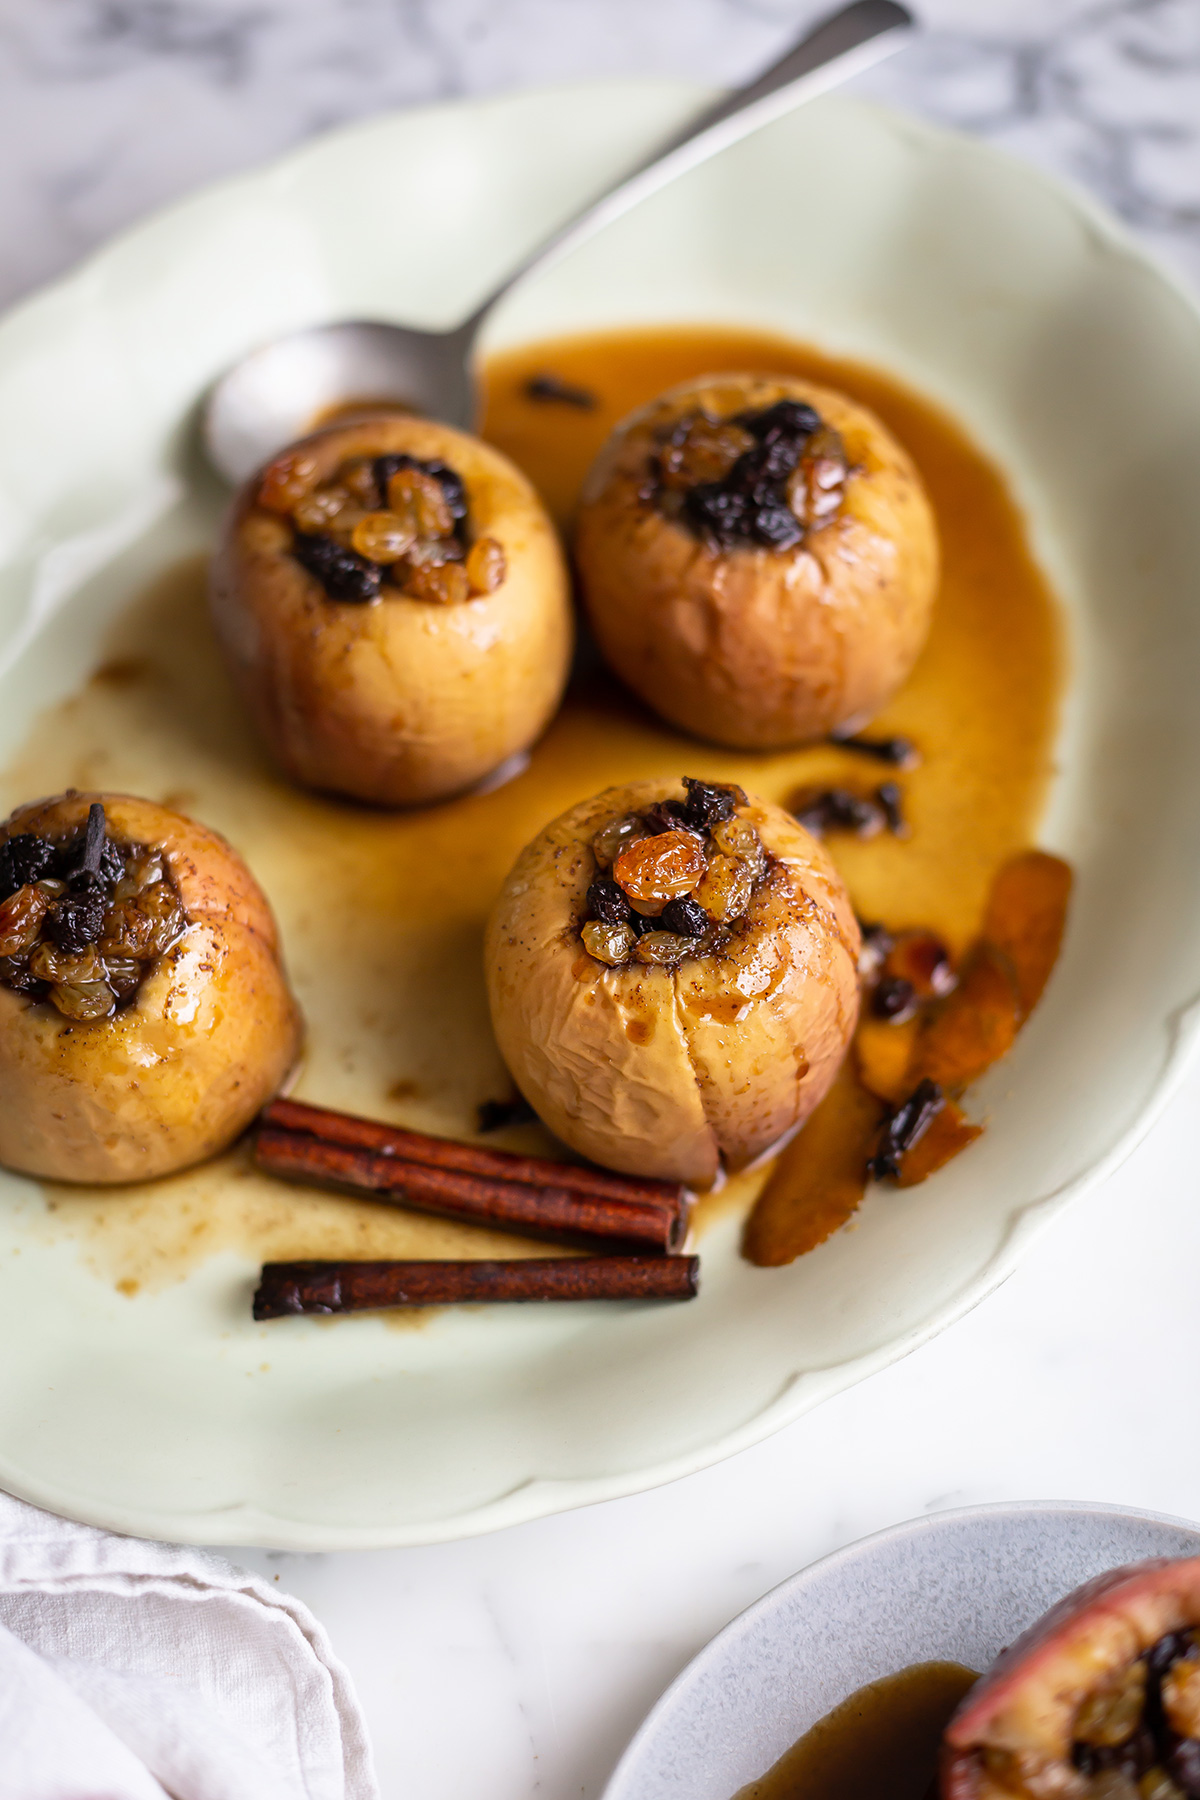 Baked apples with brandy-soaked raisins